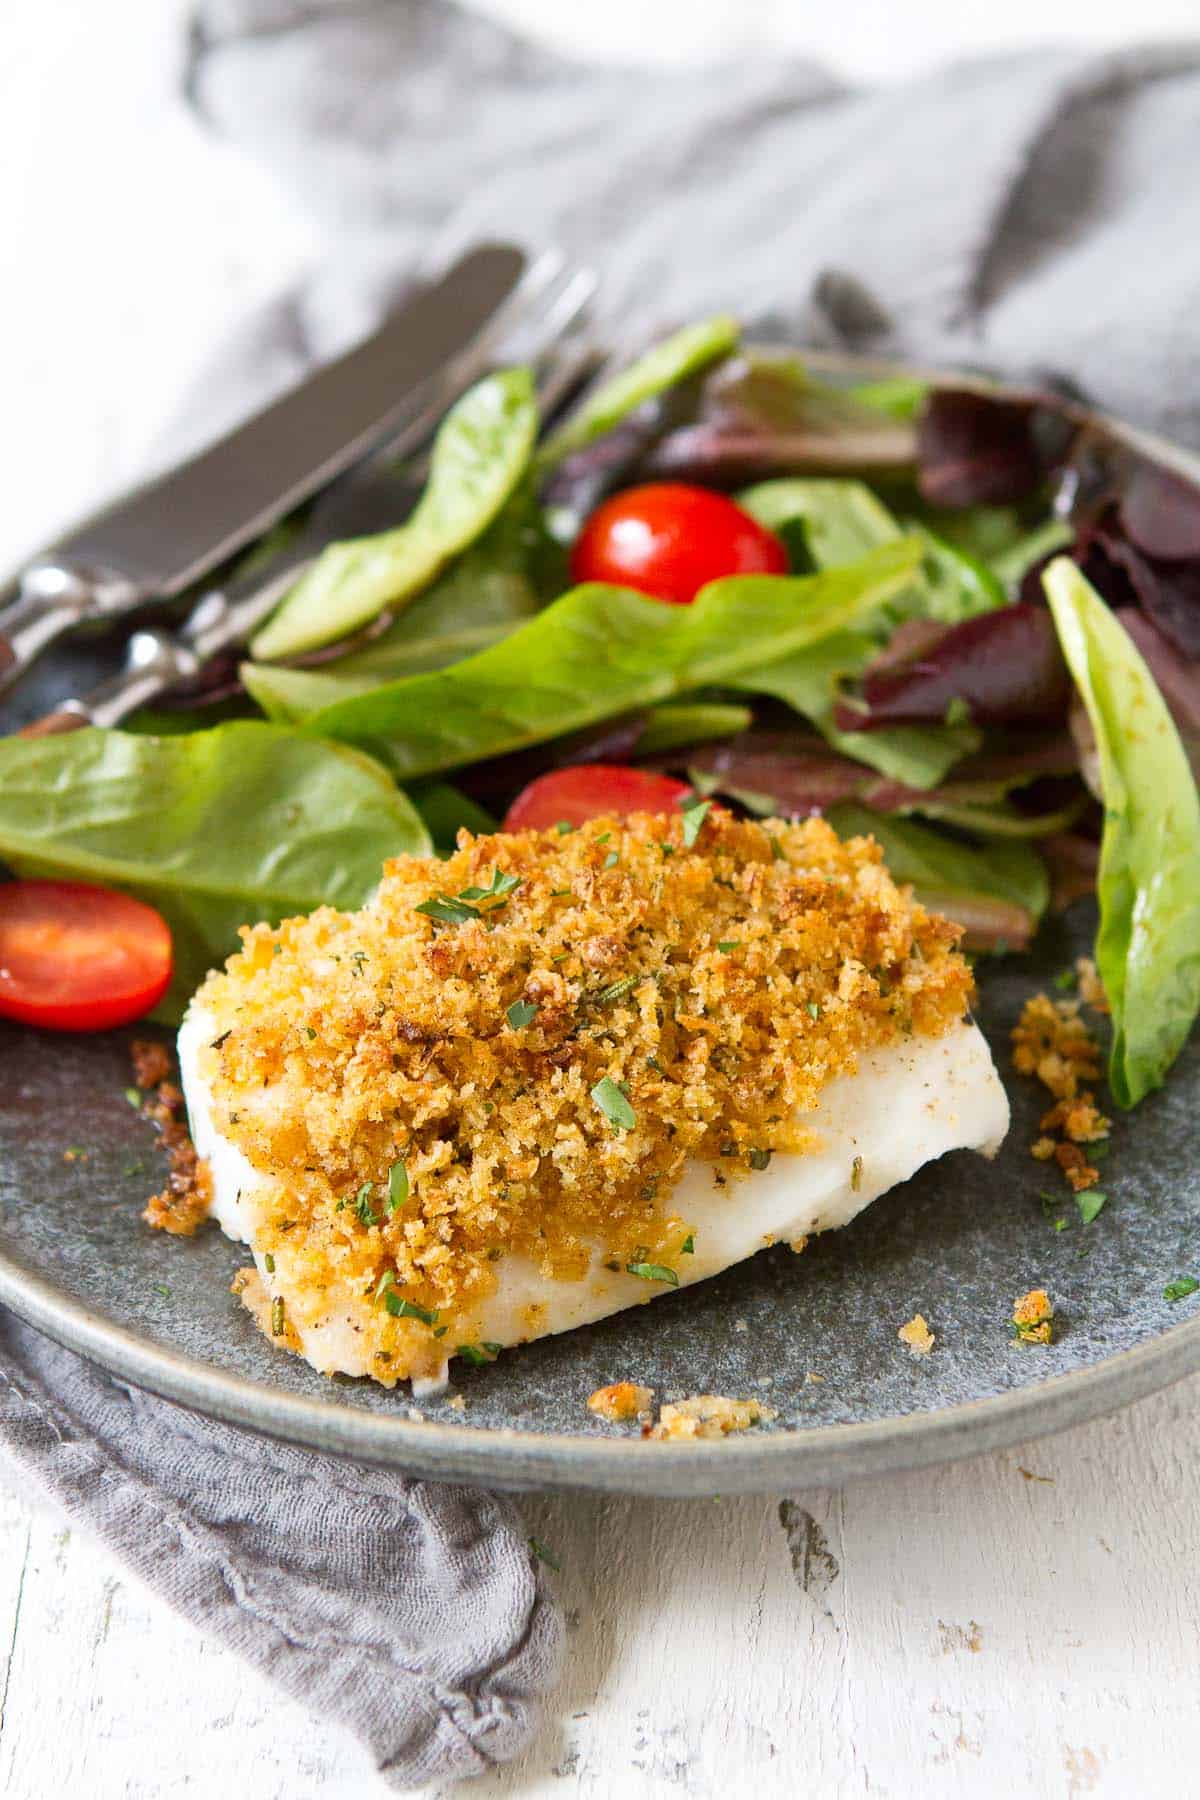 Panko-topped baked fish on a gray plate, with a green salad.